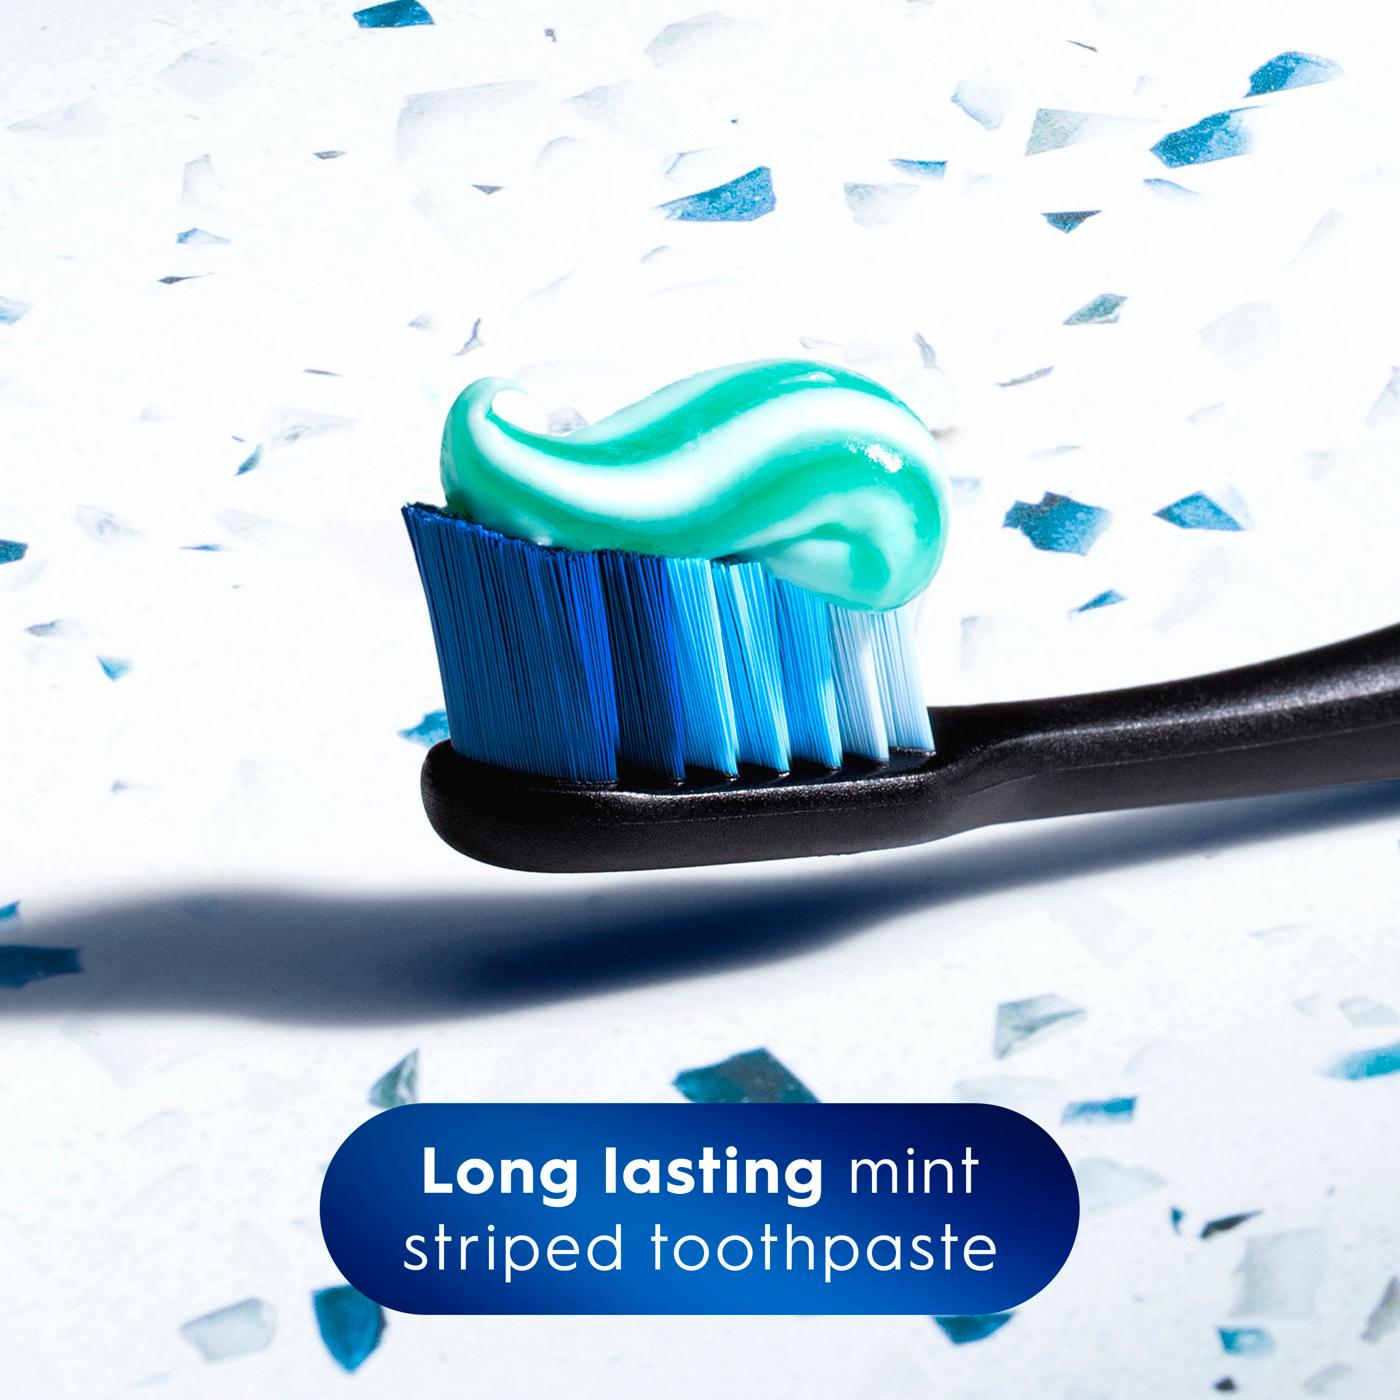 Crest Complete + Scope Outlast Whitening Toothpaste - Long Lasting Mint; image 7 of 7